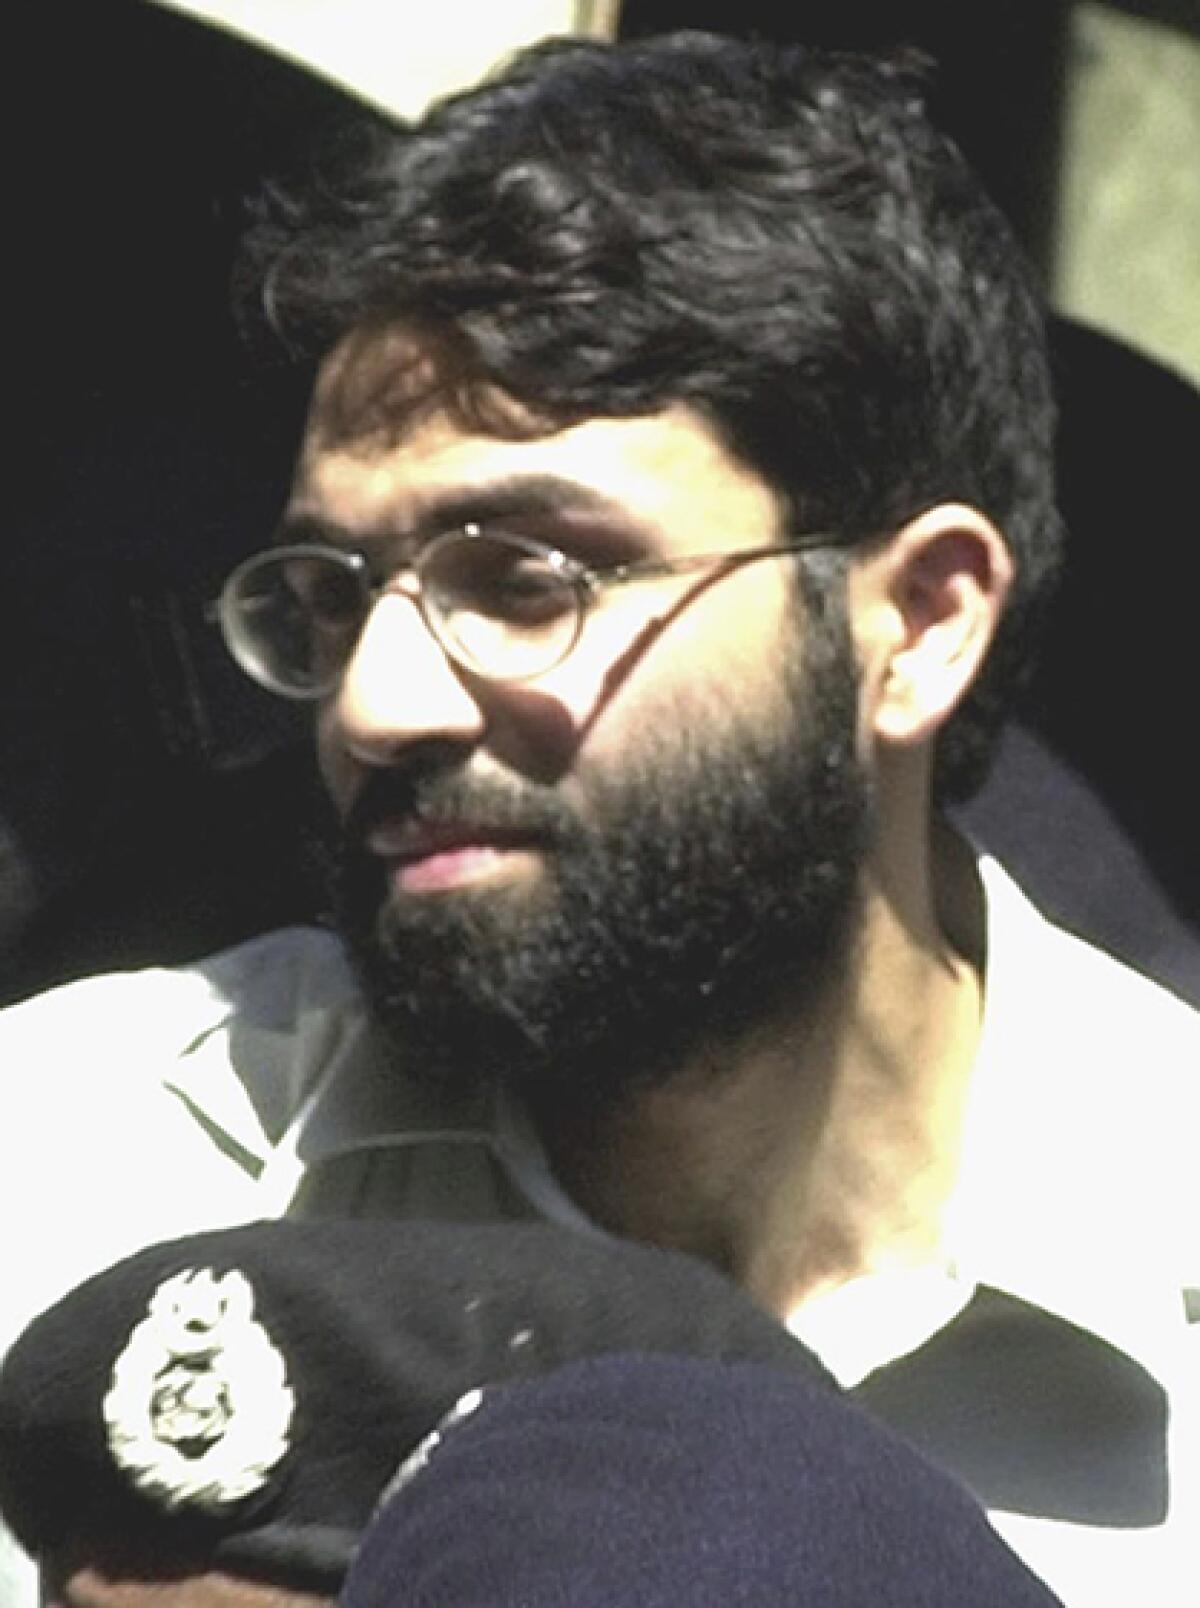 Ahmed Omar Saeed Sheikh outside a courtroom in 2002.